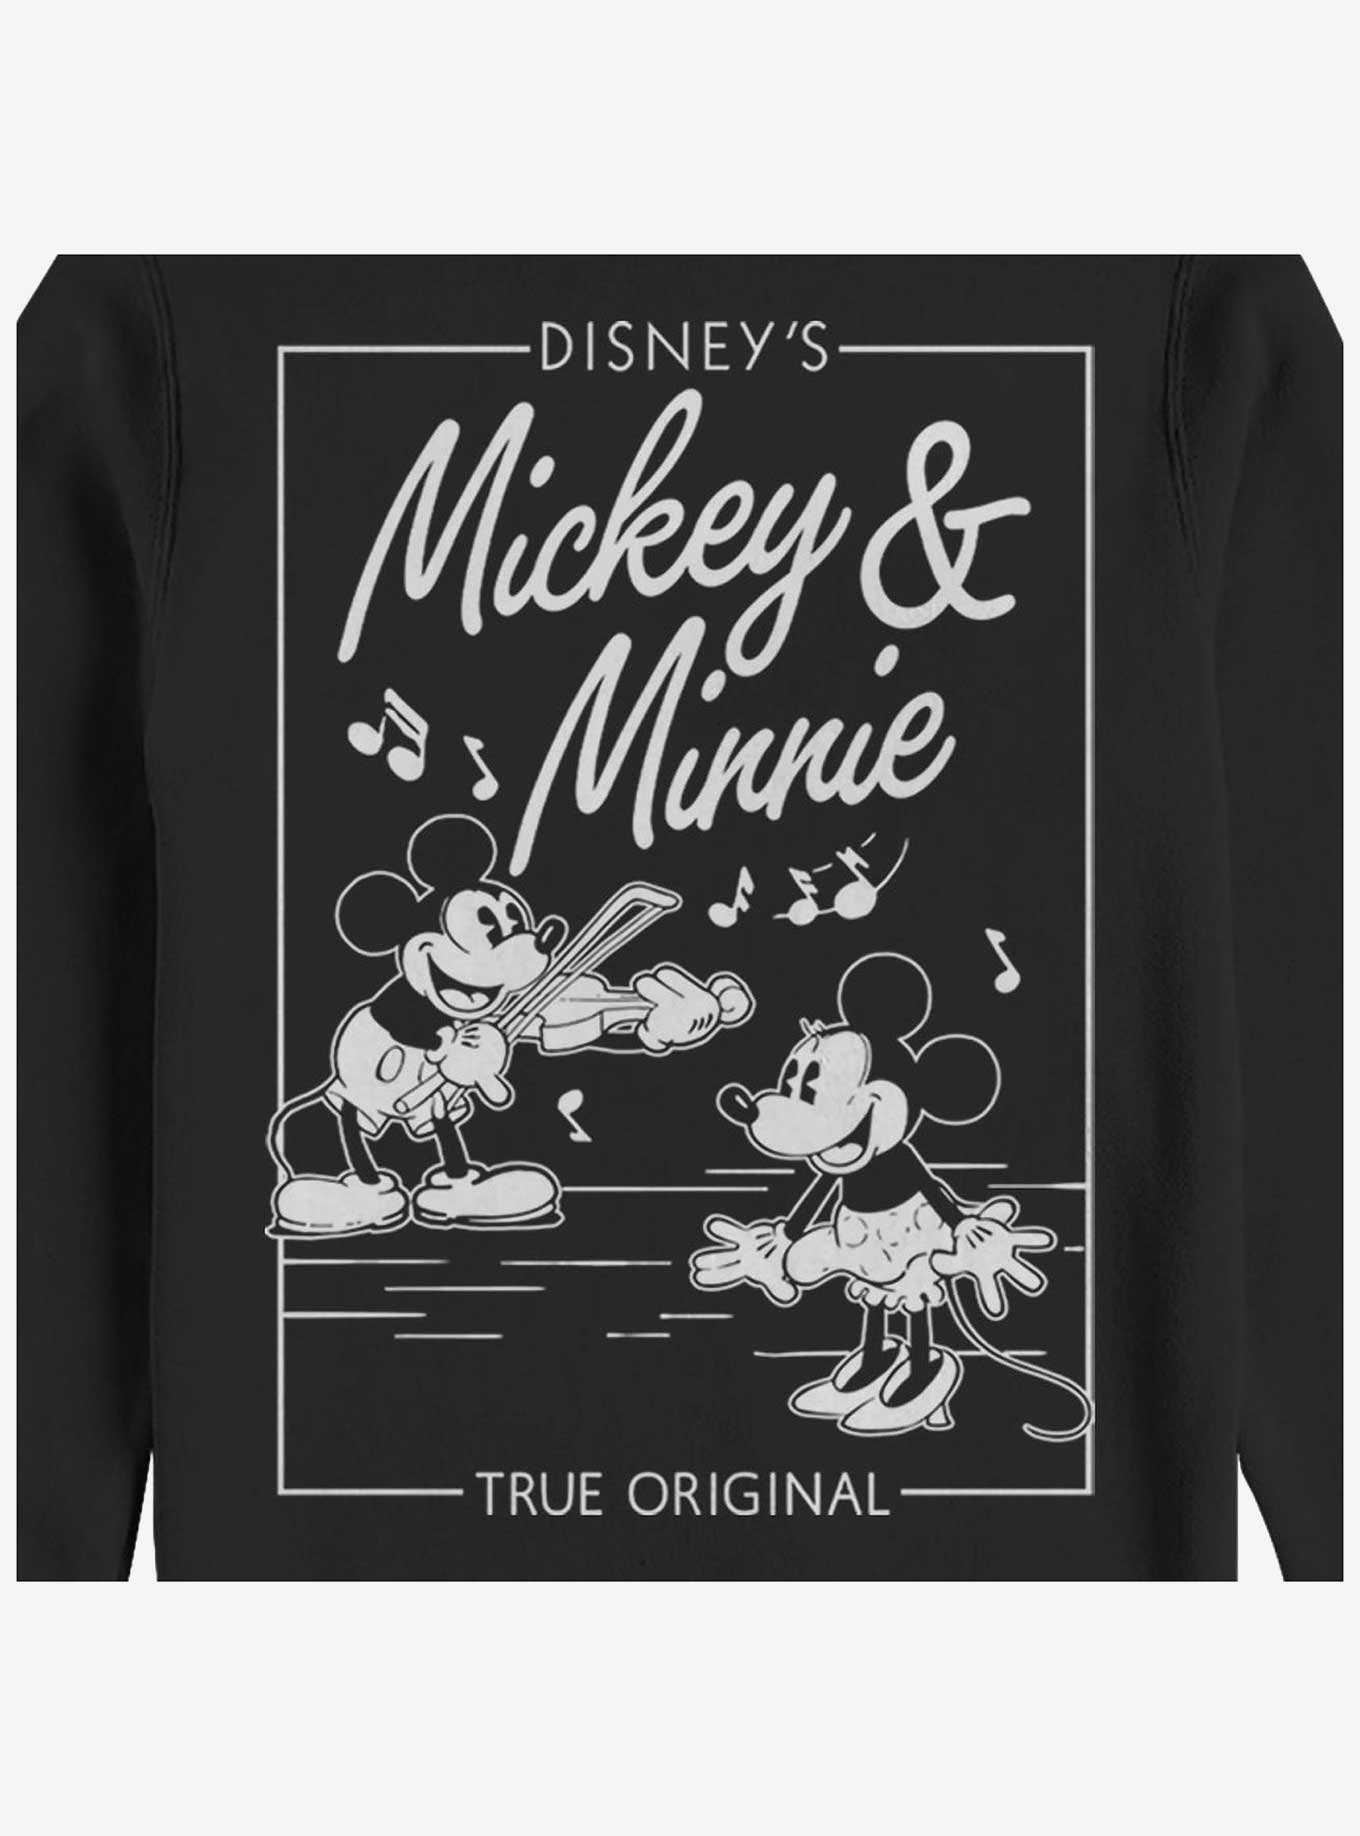 Disney Mickey Mouse & Minnie Mouse Music Cover Sweatshirt, , hi-res